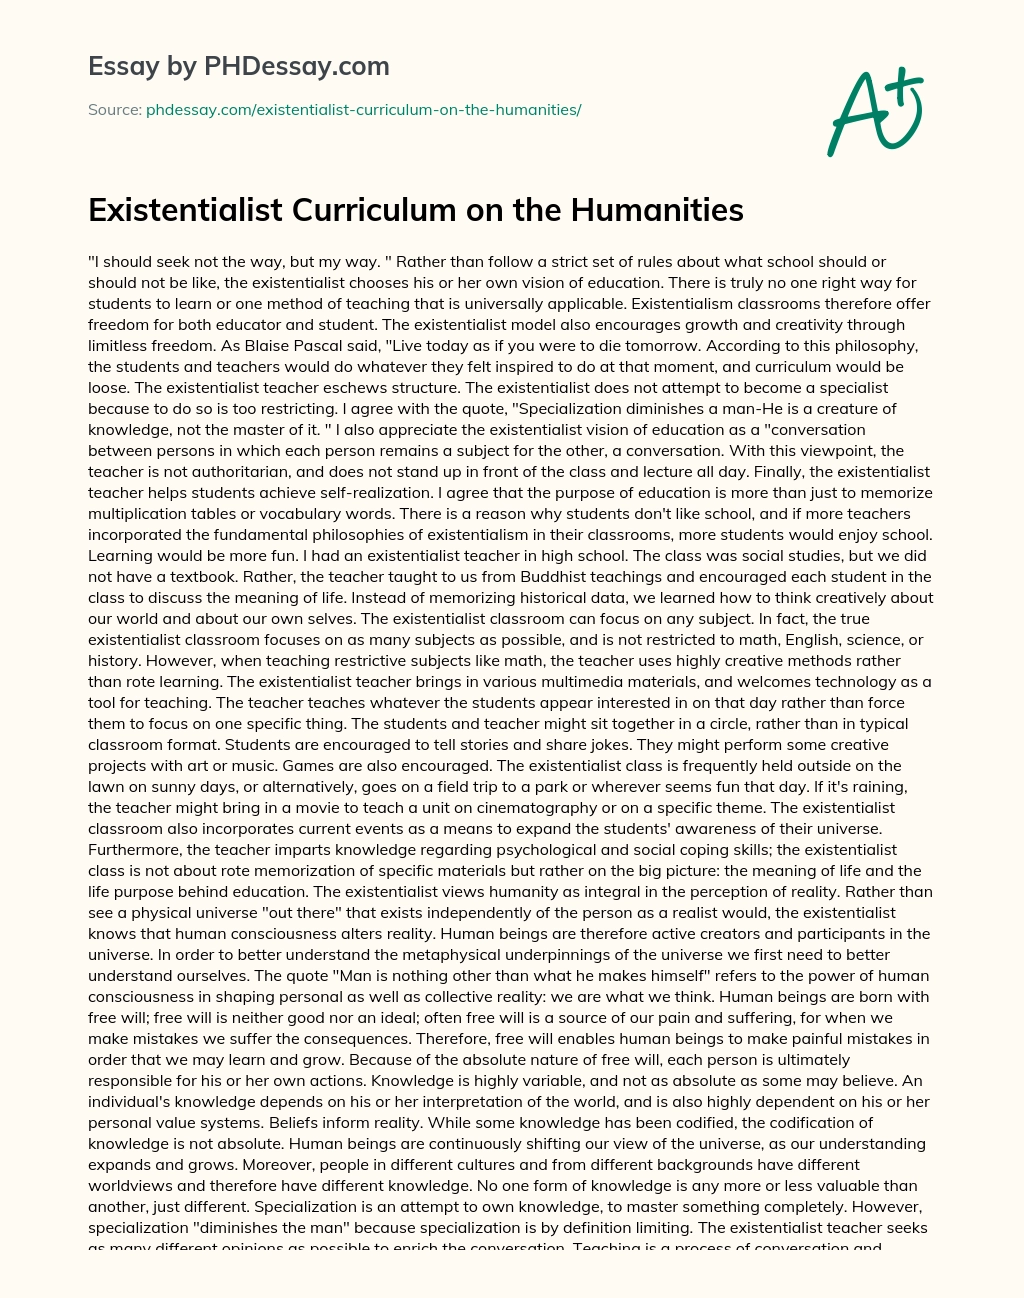 Existentialist Curriculum on the Humanities essay